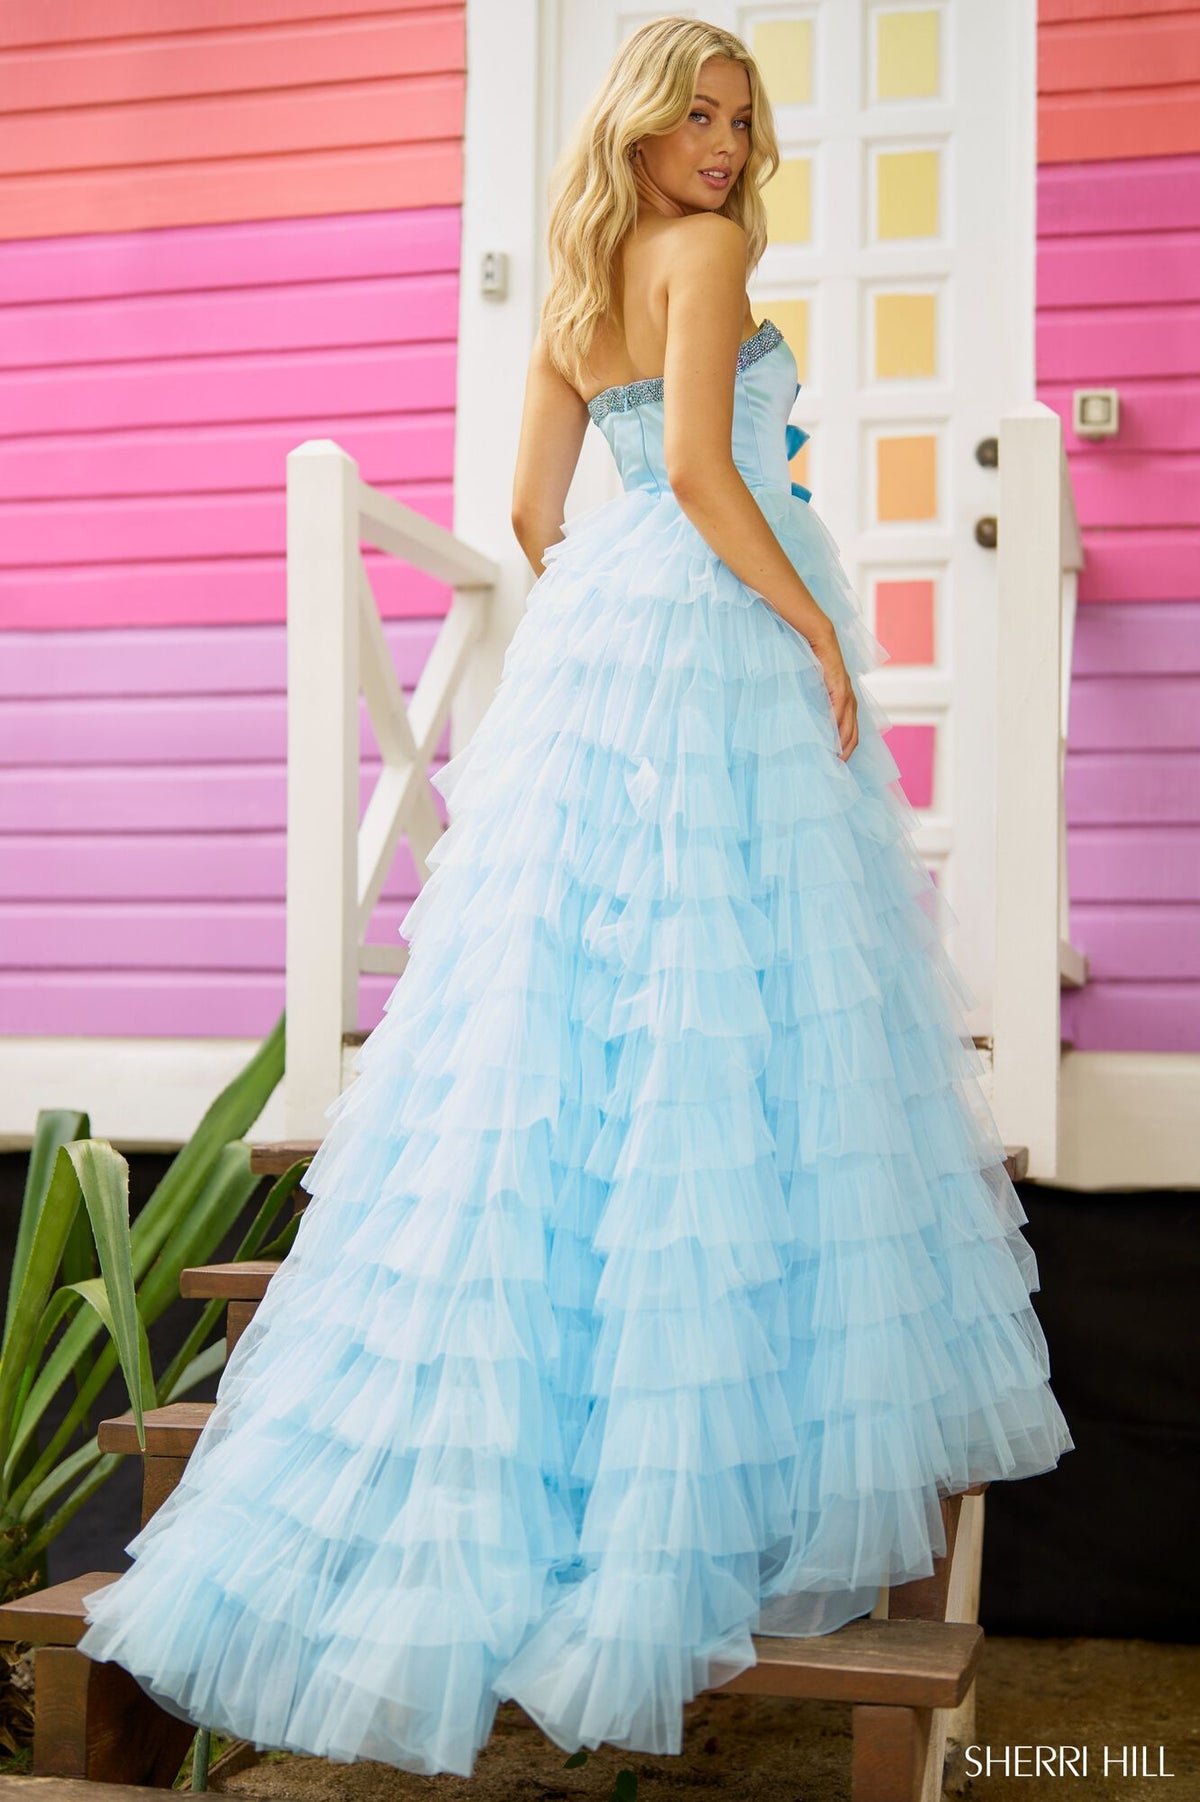 Sherri Hill 56012 Strapless A-line Prom and Quinceañera Gown - An enchanting gown featuring a strapless A-line silhouette, deep V neckline, bow embellishments, and a ruffle skirt with a slit for an elegant and timeless look.